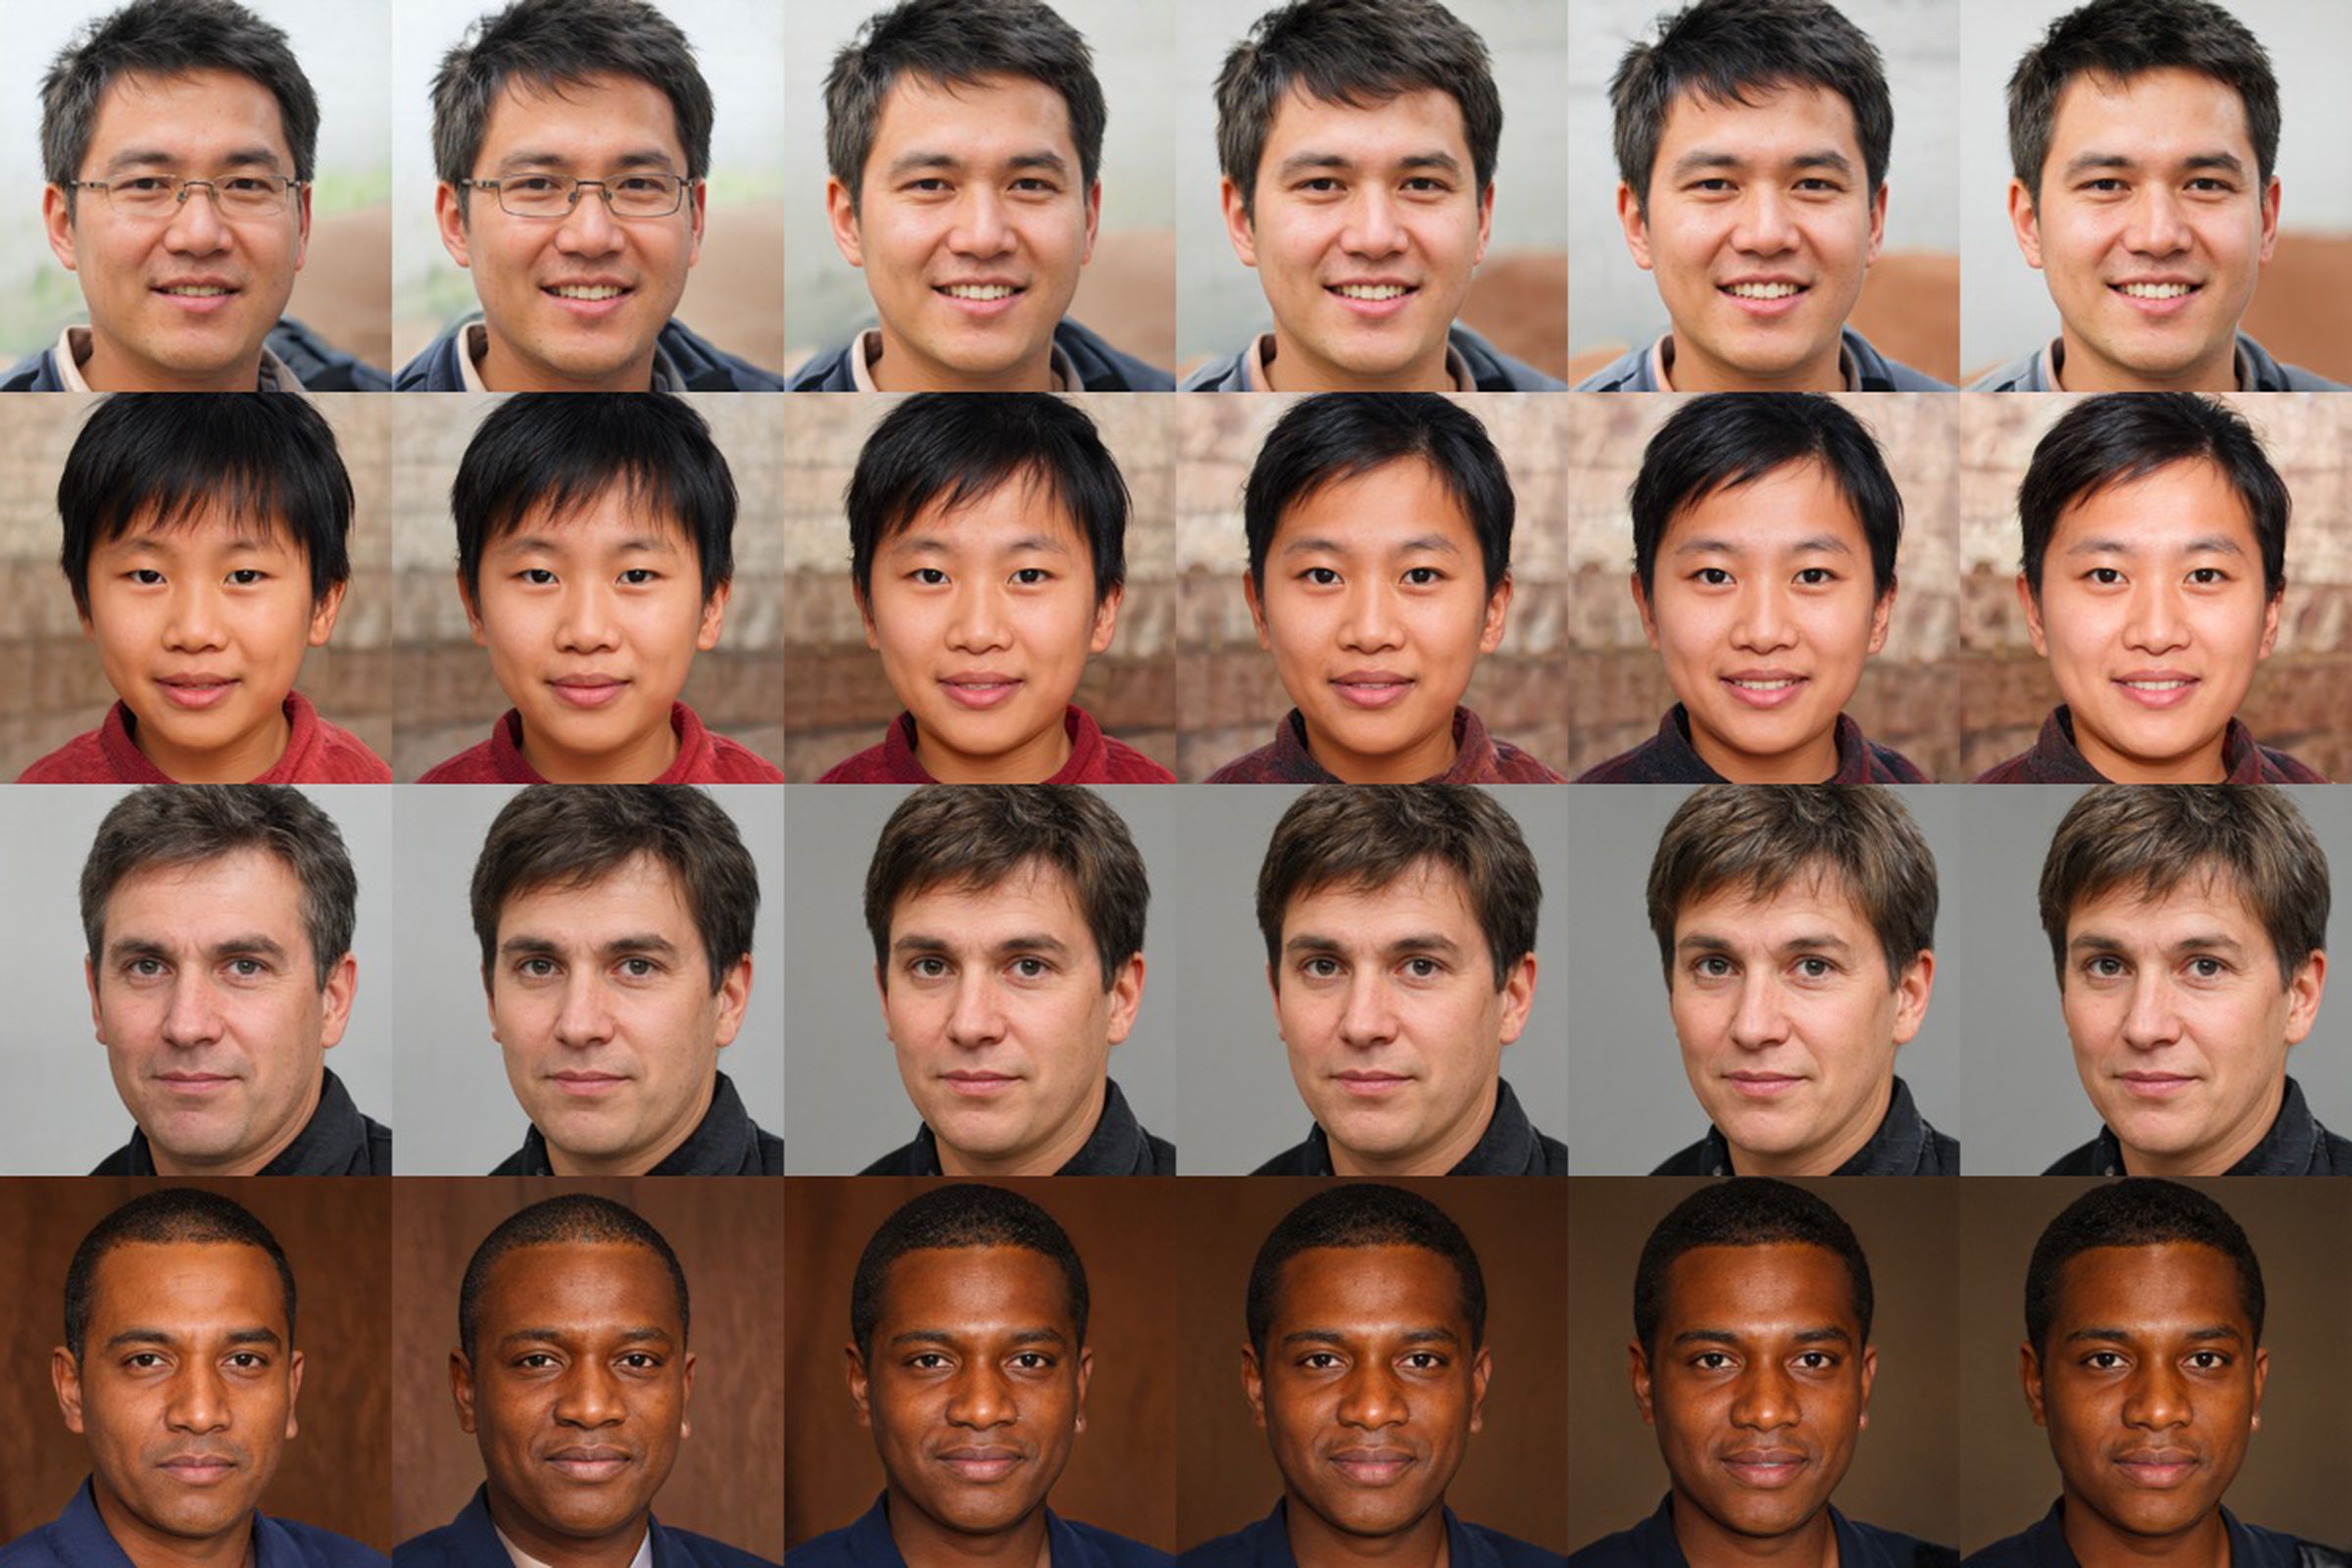 The winning entry used a GAN to generate faces that varied by skin tone, width, and masculine versus feminine features. 